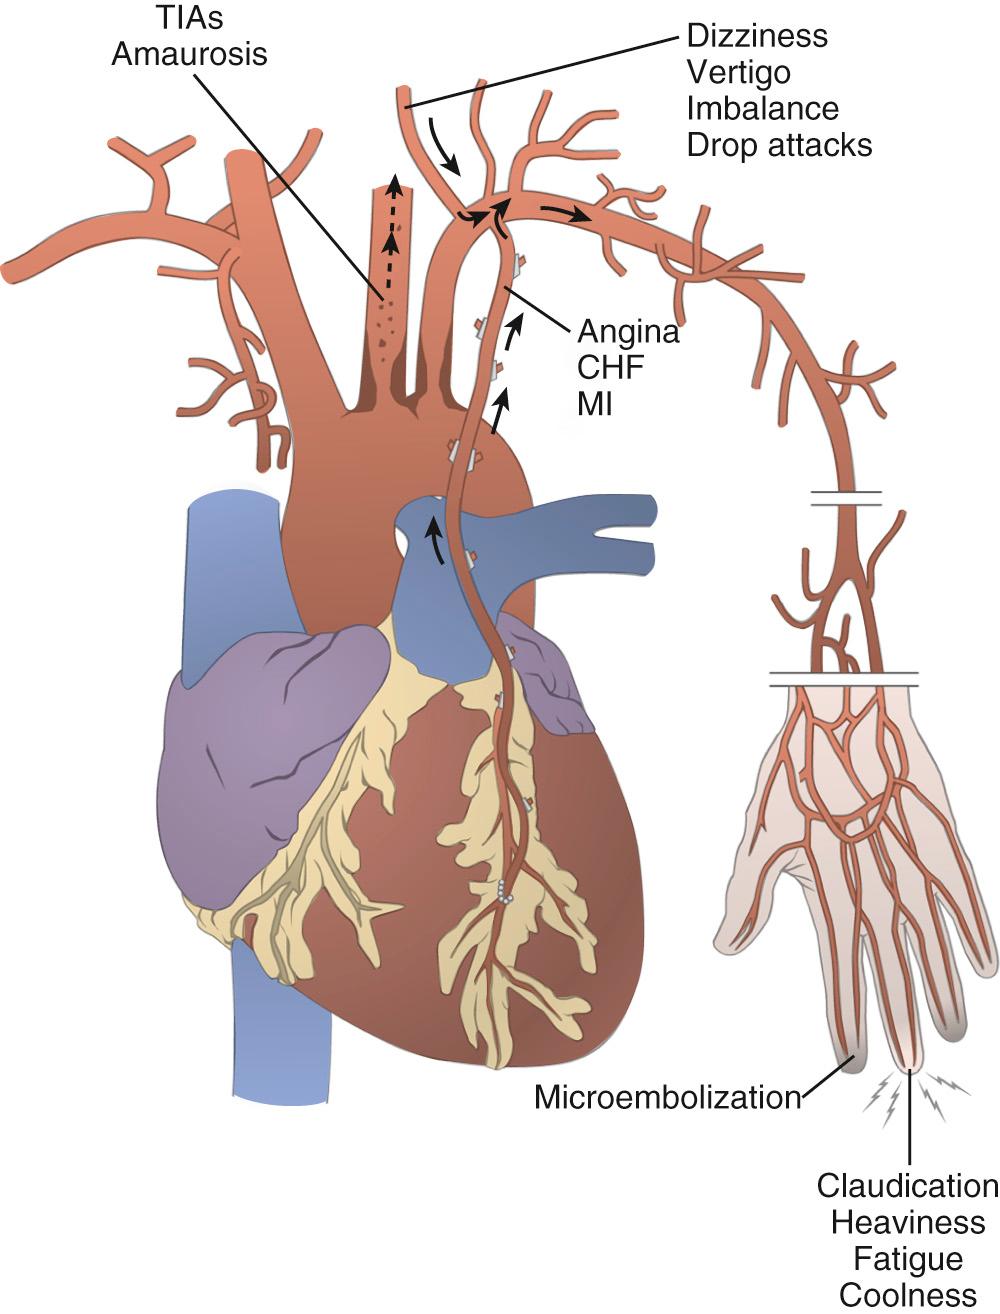 FIGURE 73-1, Common symptoms of occlusive disease involving the brachiocephalic branches. Compromised flow or emboli from common carotid artery lesions can cause a variety of neurologic symptoms, including transient ischemic attacks (TIAs) and amaurosis fugax. Subclavian artery lesions can cause vertebrobasilar insufficiency (including vertebral-subclavian steal), cardiac complications (including angina, myocardial infarction [MI], and congestive heart failure [CHF]) caused by coronary-subclavian steal, and upper-extremity arterial insufficiency or microembolization.